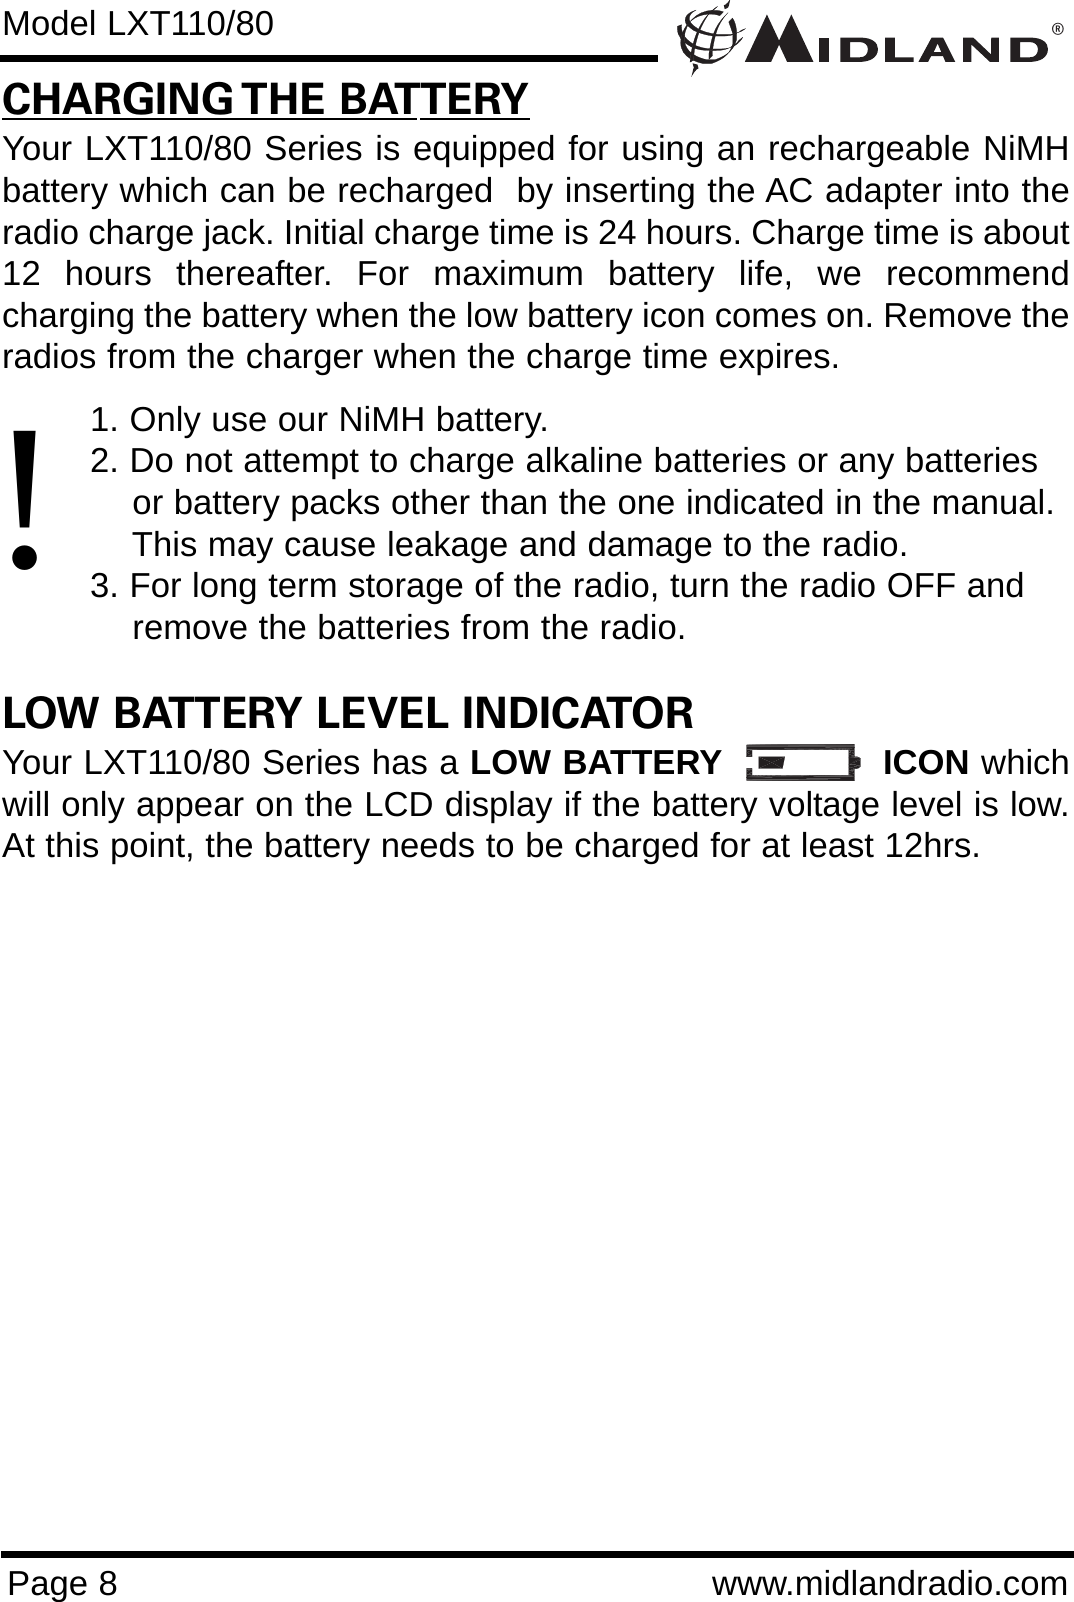 ®Page 8 www.midlandradio.comCHARGING THE BATTERYYour LXT110/80 Series is equipped for using an rechargeable NiMHbattery which can be recharged  by inserting the AC adapter into theradio charge jack. Initial charge time is 24 hours. Charge time is about12 hours thereafter. For maximum battery life, we recommendcharging the battery when the low battery icon comes on. Remove theradios from the charger when the charge time expires.1. Only use our NiMH battery.2. Do not attempt to charge alkaline batteries or any batteries or battery packs other than the one indicated in the manual. This may cause leakage and damage to the radio.3. For long term storage of the radio, turn the radio OFF and remove the batteries from the radio.LOW BATTERY LEVEL INDICATORYour LXT110/80 Series has a LOW BATTERY ICON whichwill only appear on the LCD display if the battery voltage level is low.At this point, the battery needs to be charged for at least 12hrs.Model LXT110/80!